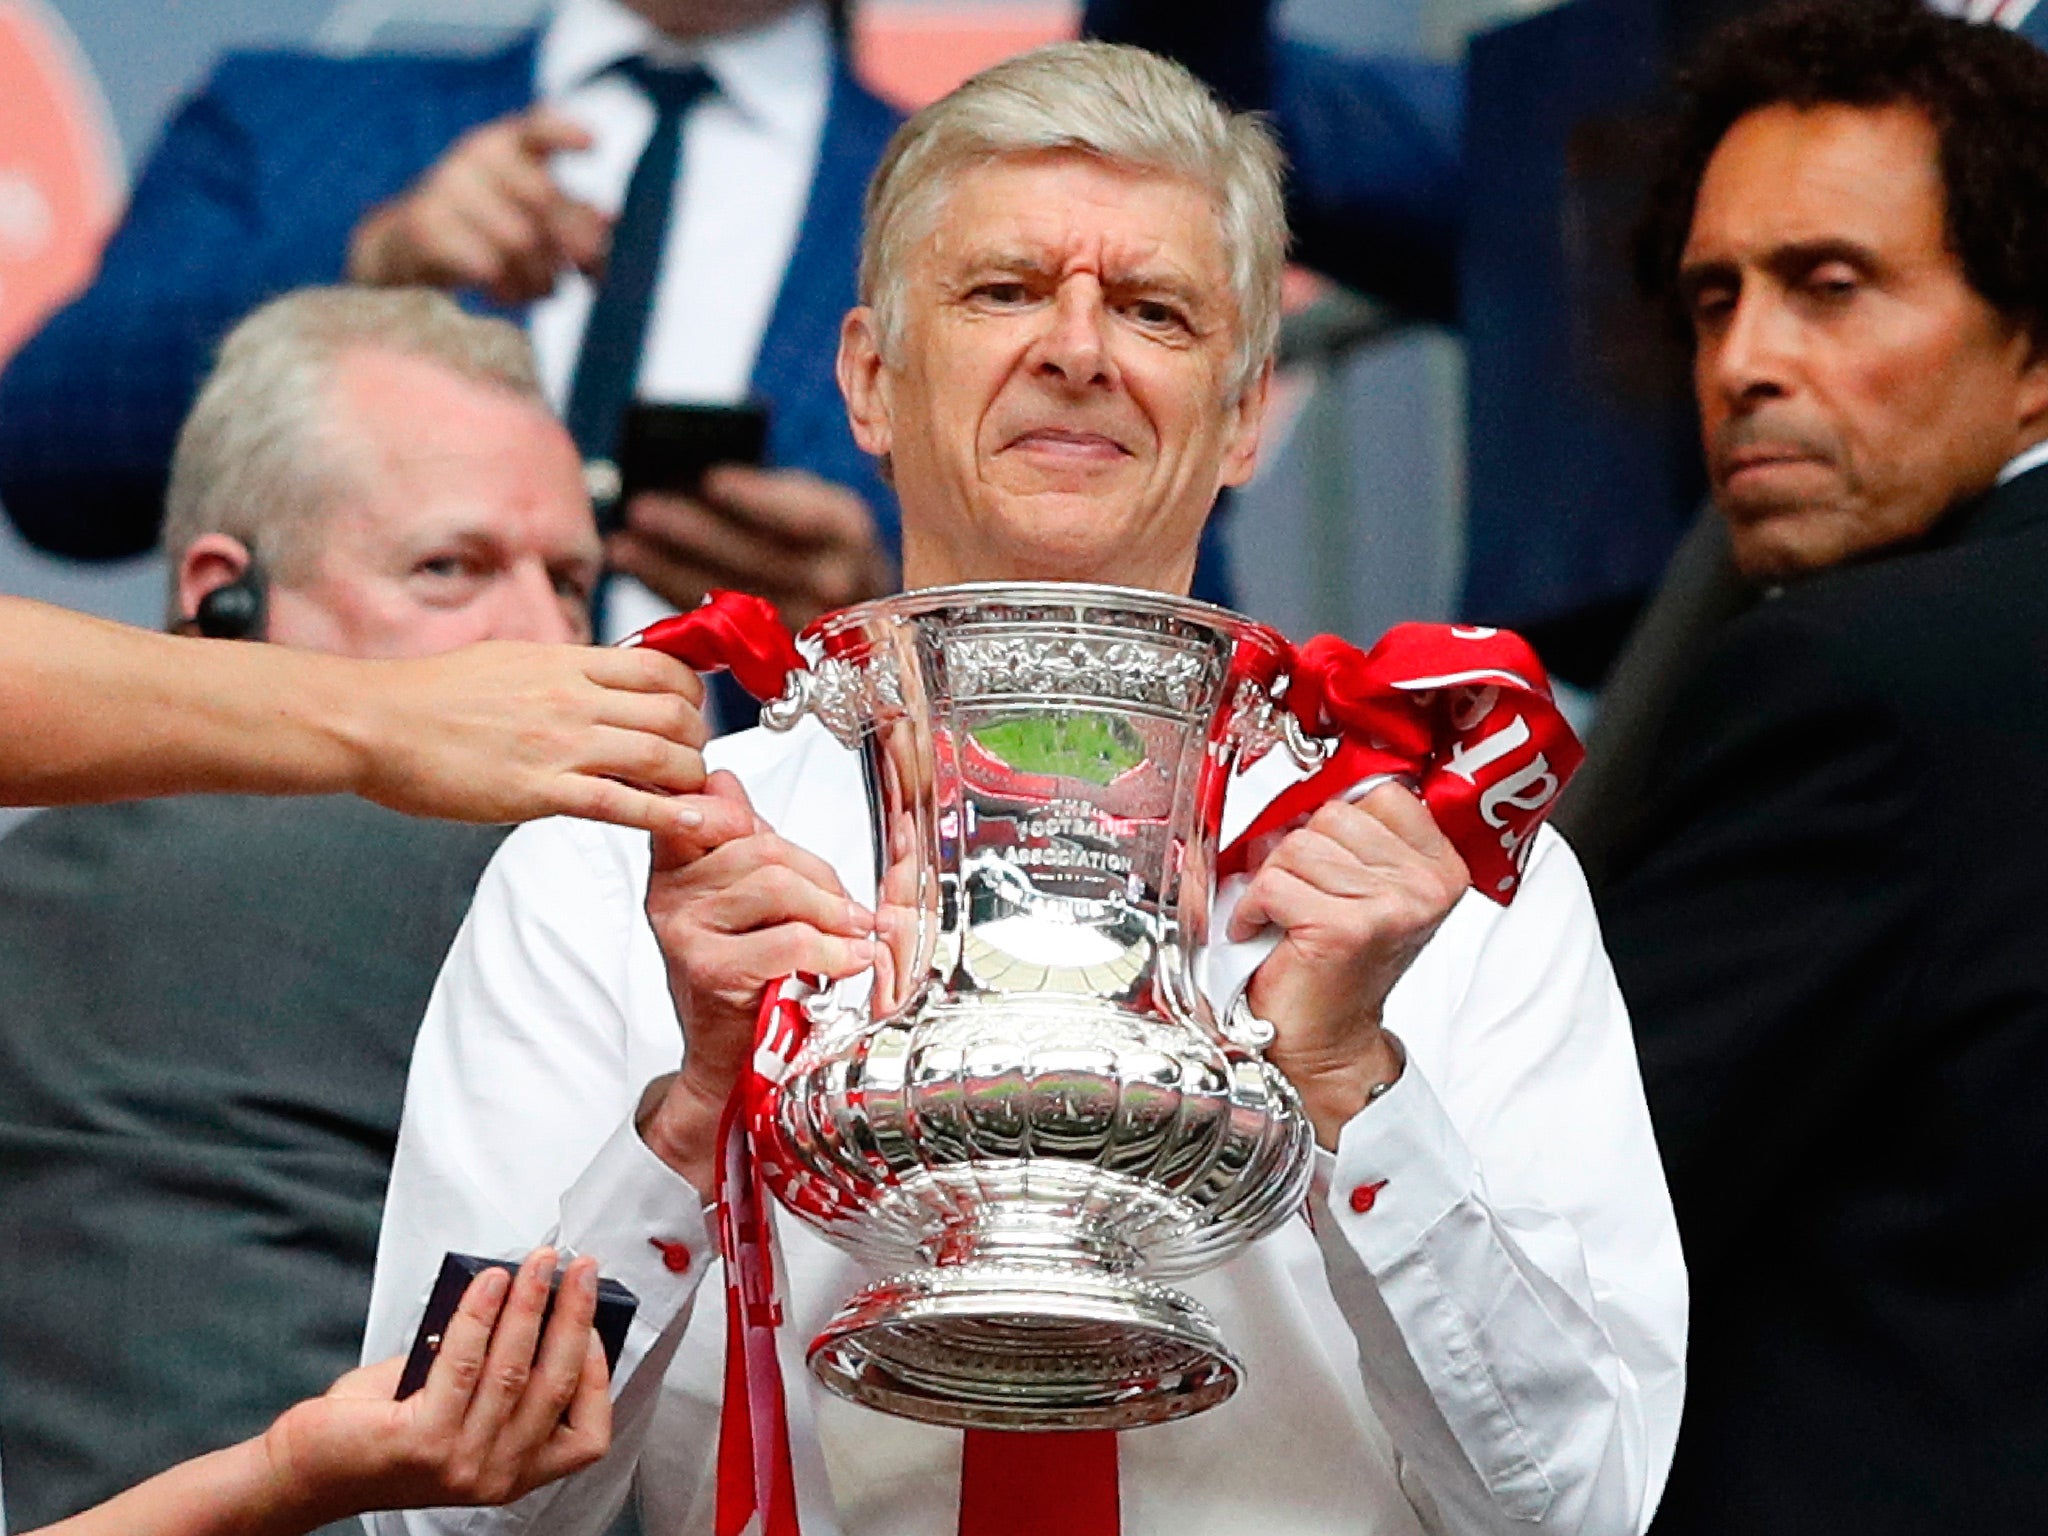 Arsène Wenger ended a difficult season with a moment of happiness